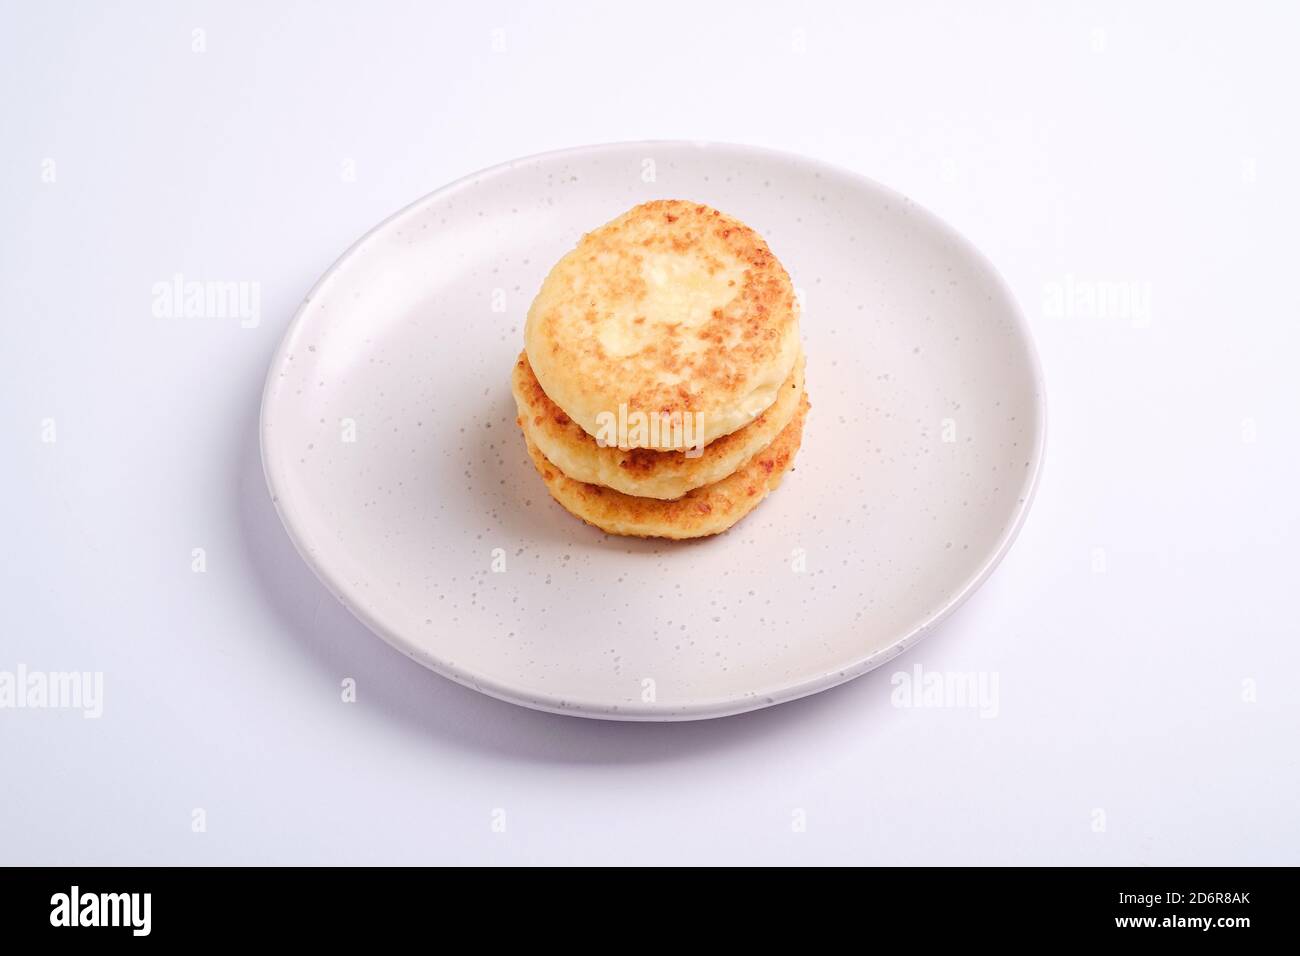 Cottage cheese fritters. Dessert breakfast in plate on white background, angle view Stock Photo